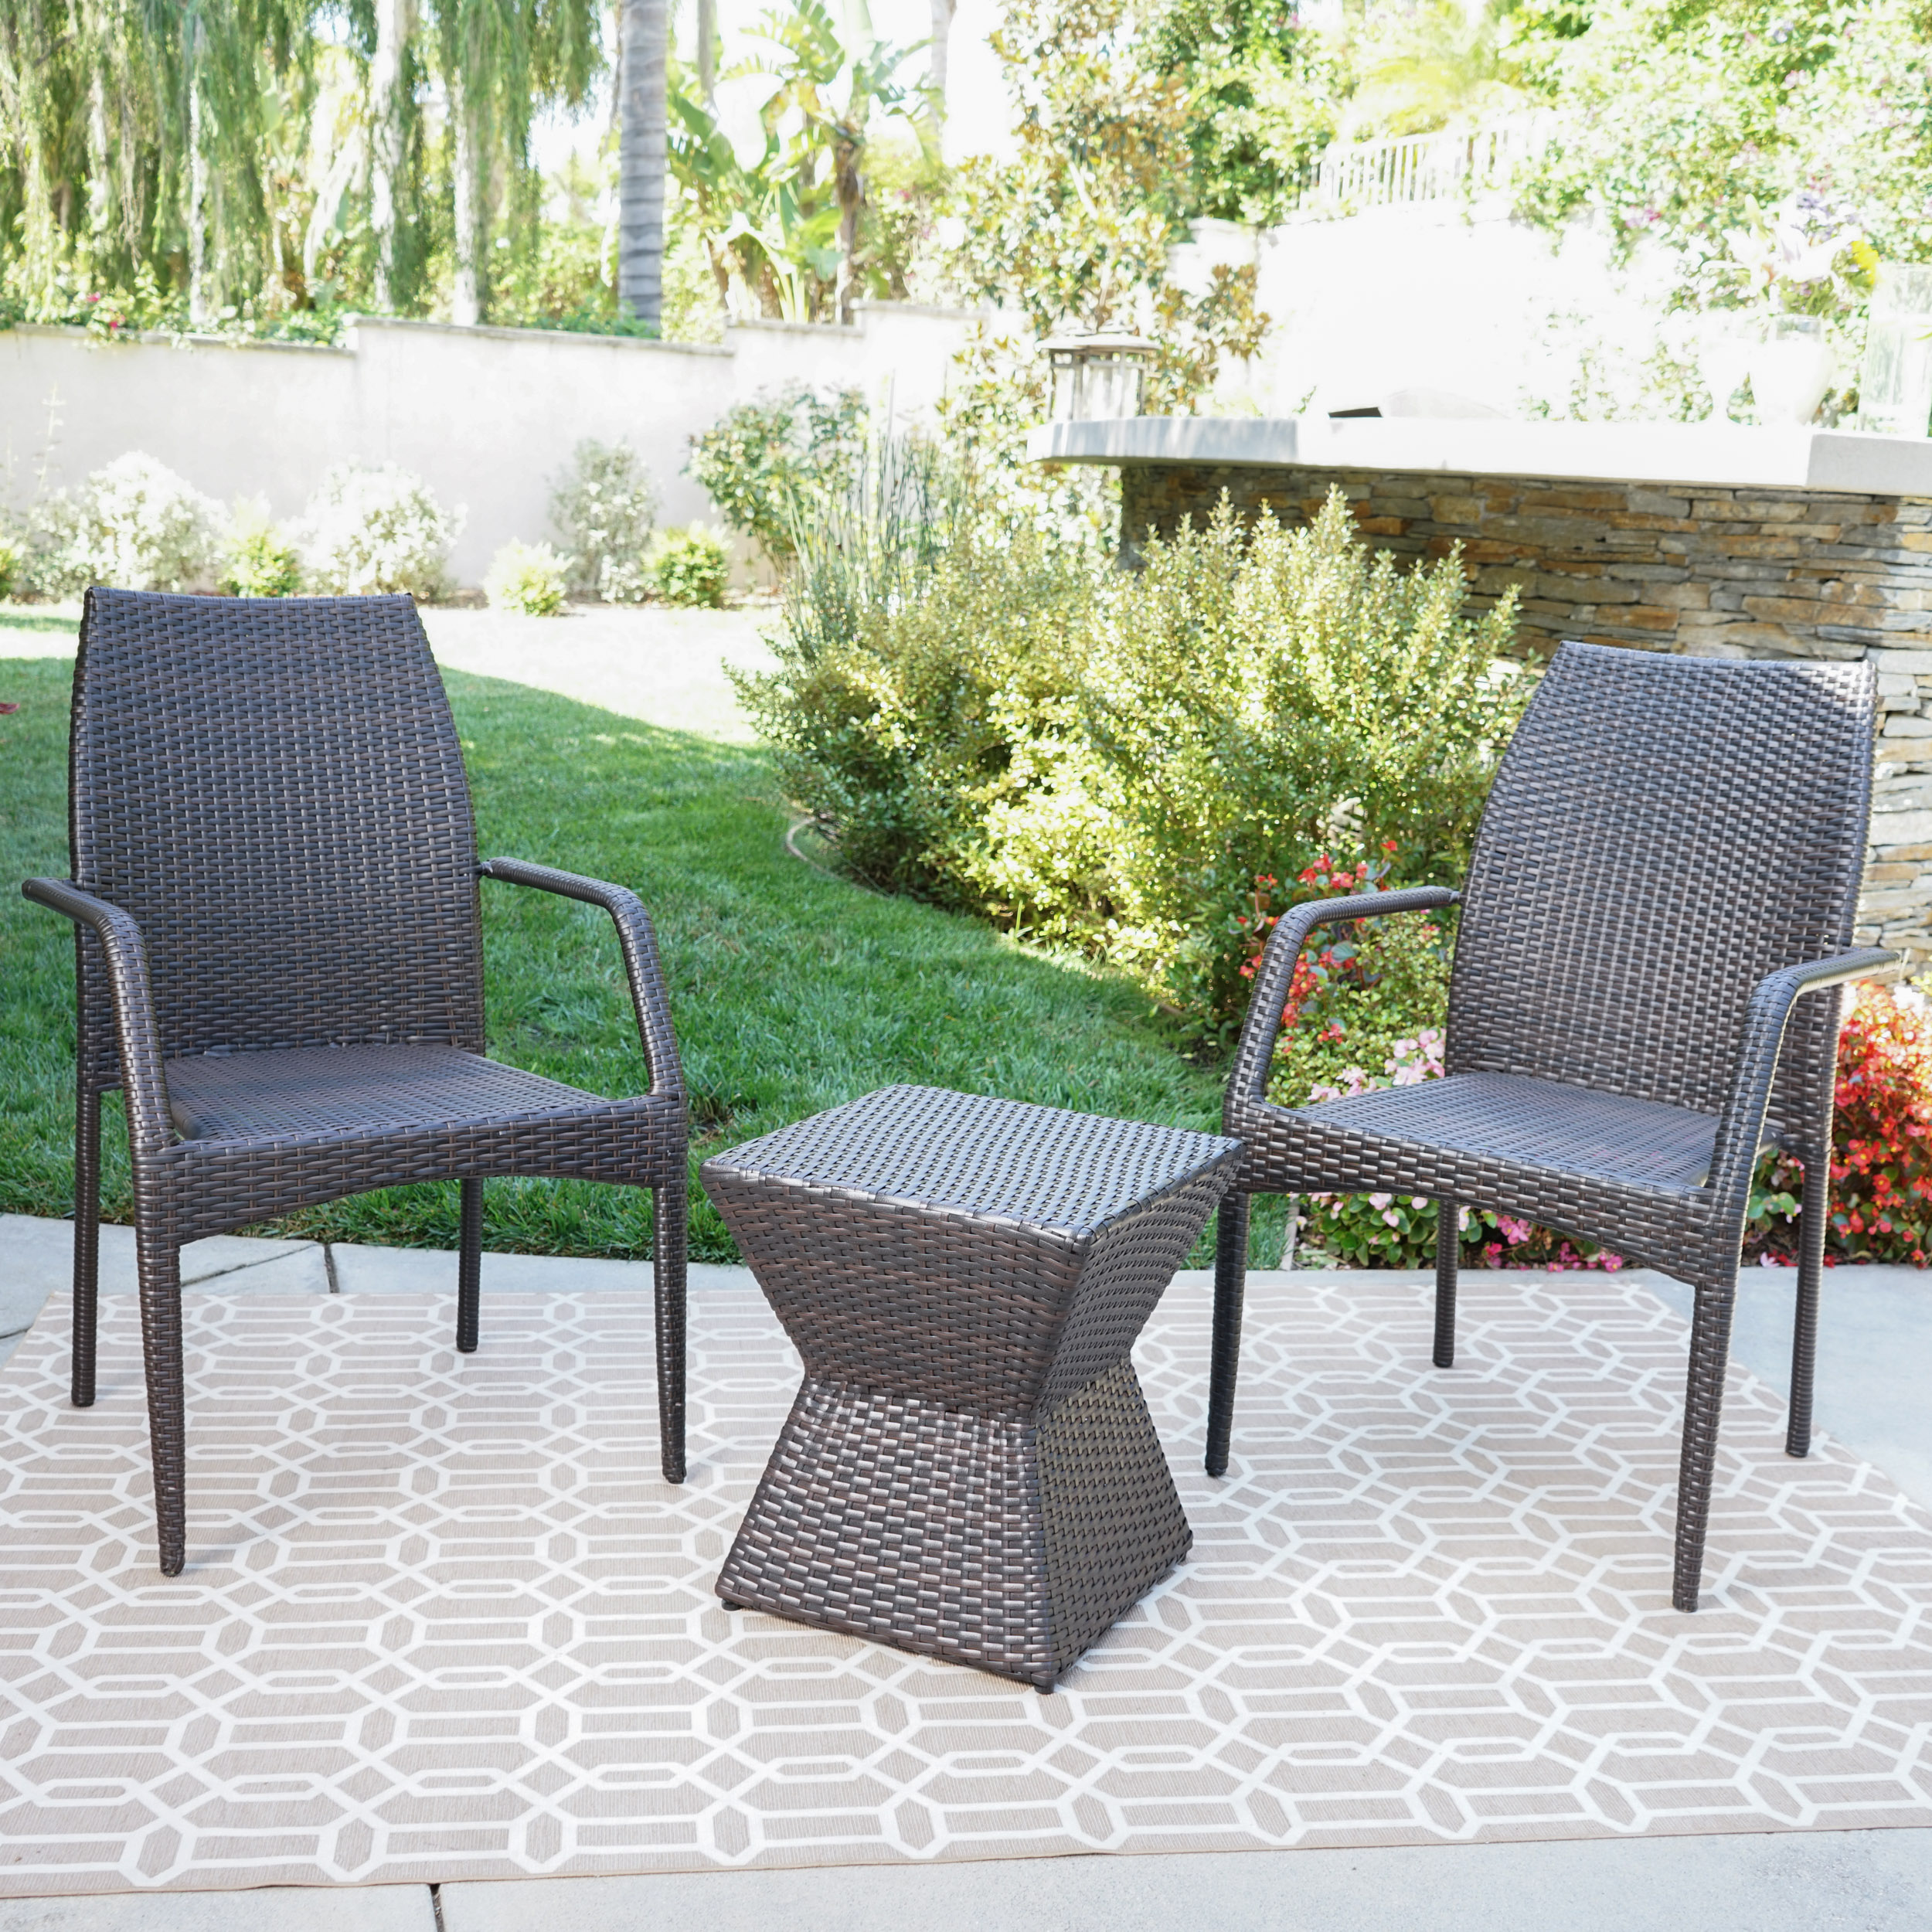 Ruby Outdoor 3 Piece Wicker Chat Set with Stacking Chairs and Square Side Table, Multibrown - image 5 of 9